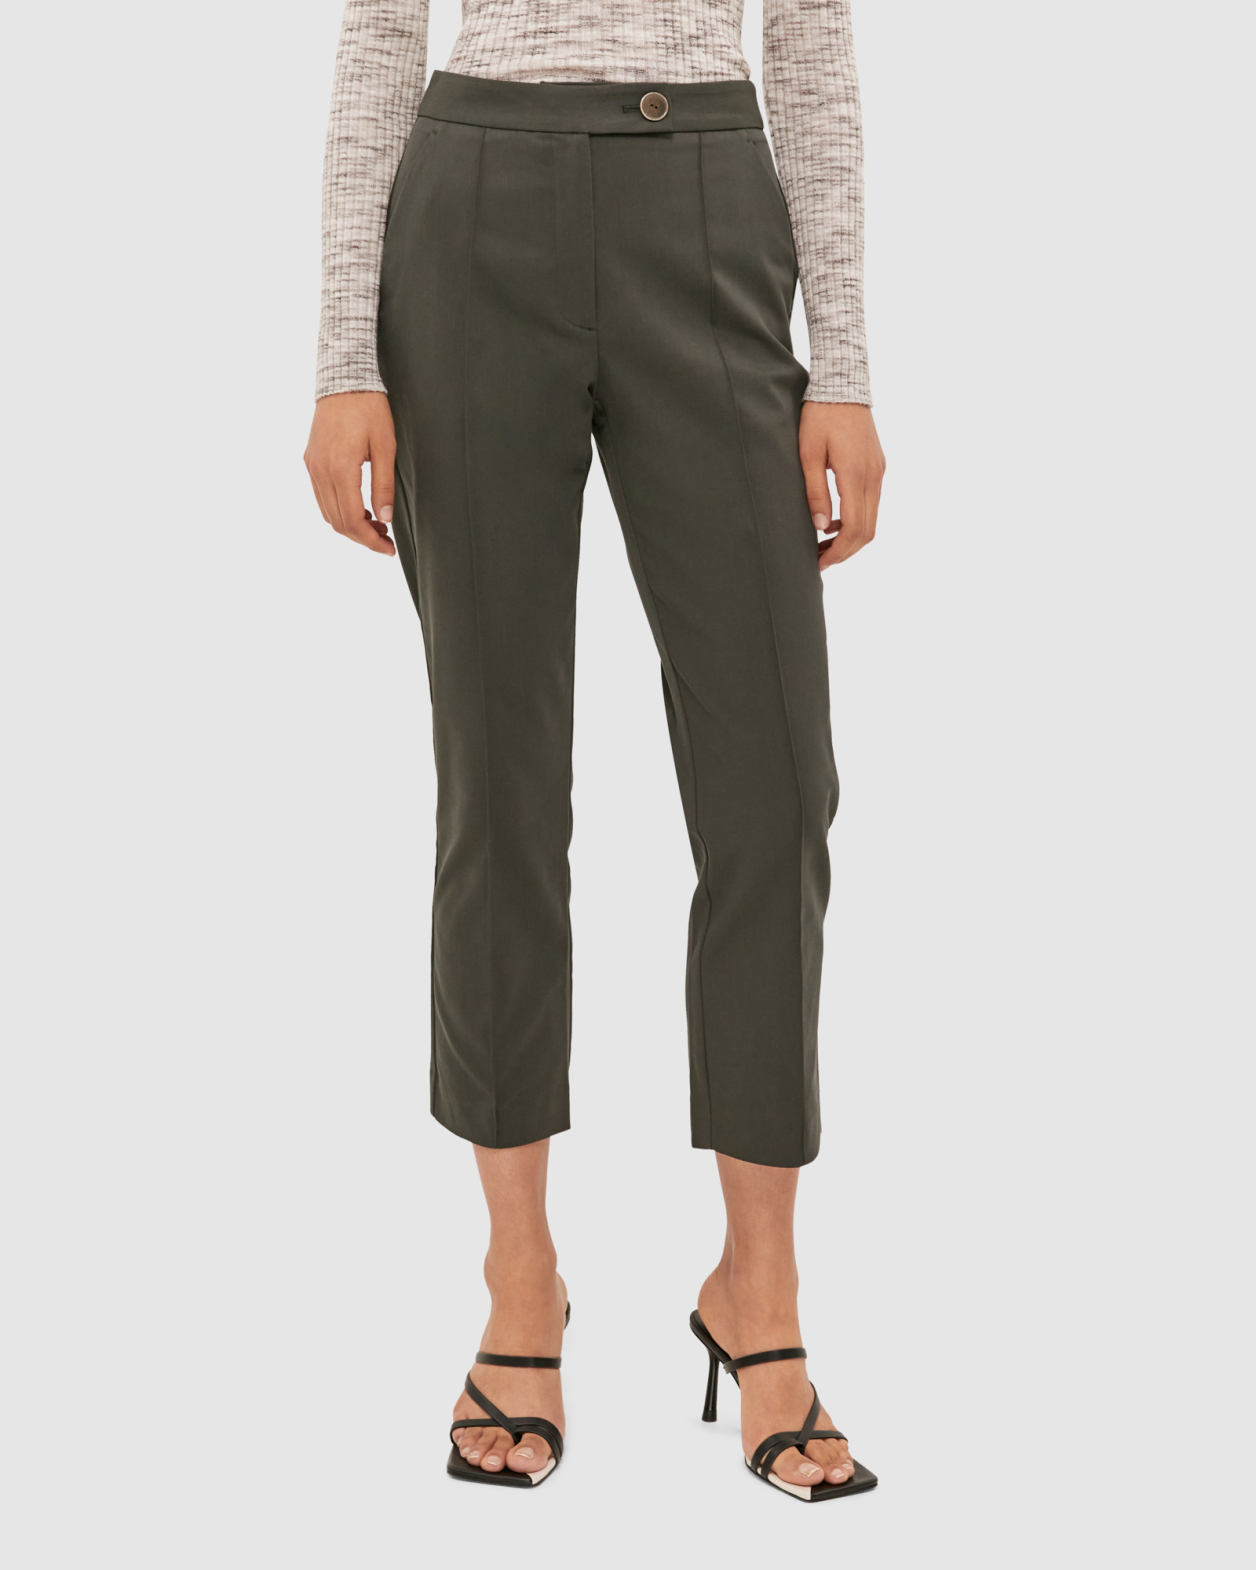 Straight Leg Pant in FOREST